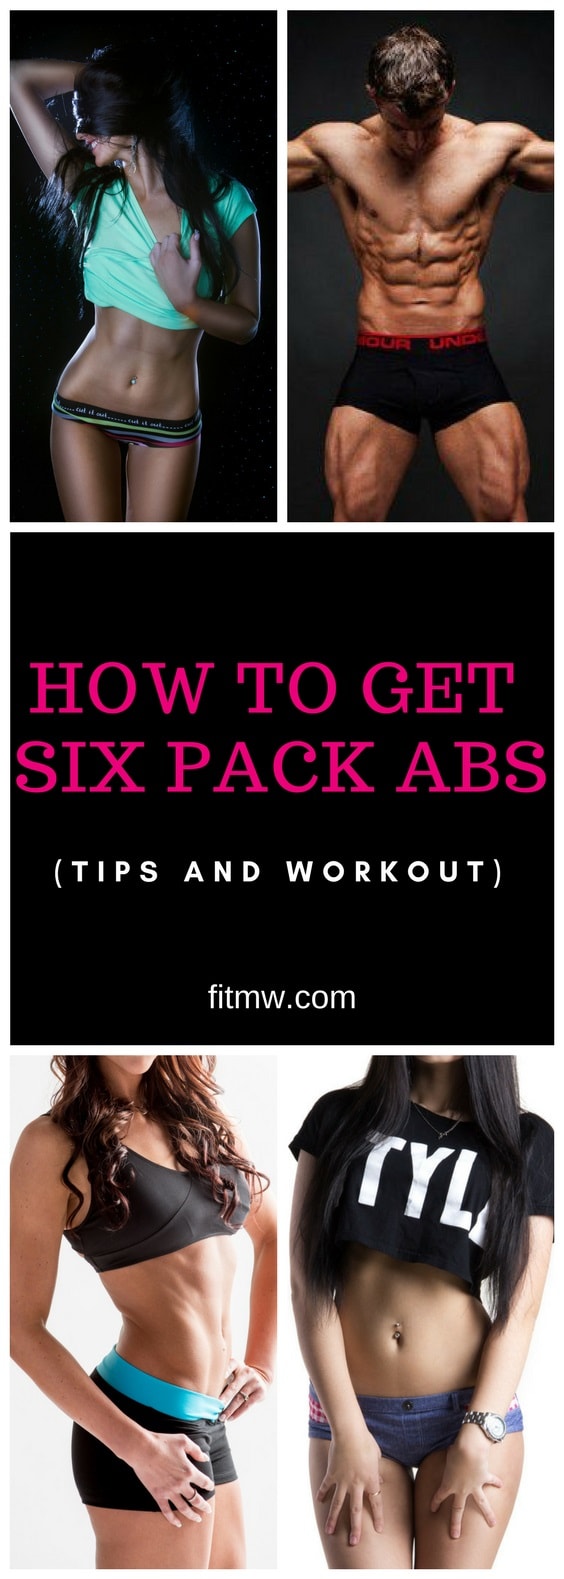 Six pack abs are on the top of people's wish lists for their physiques. What does it take to actually get them though? Read this article to find out!